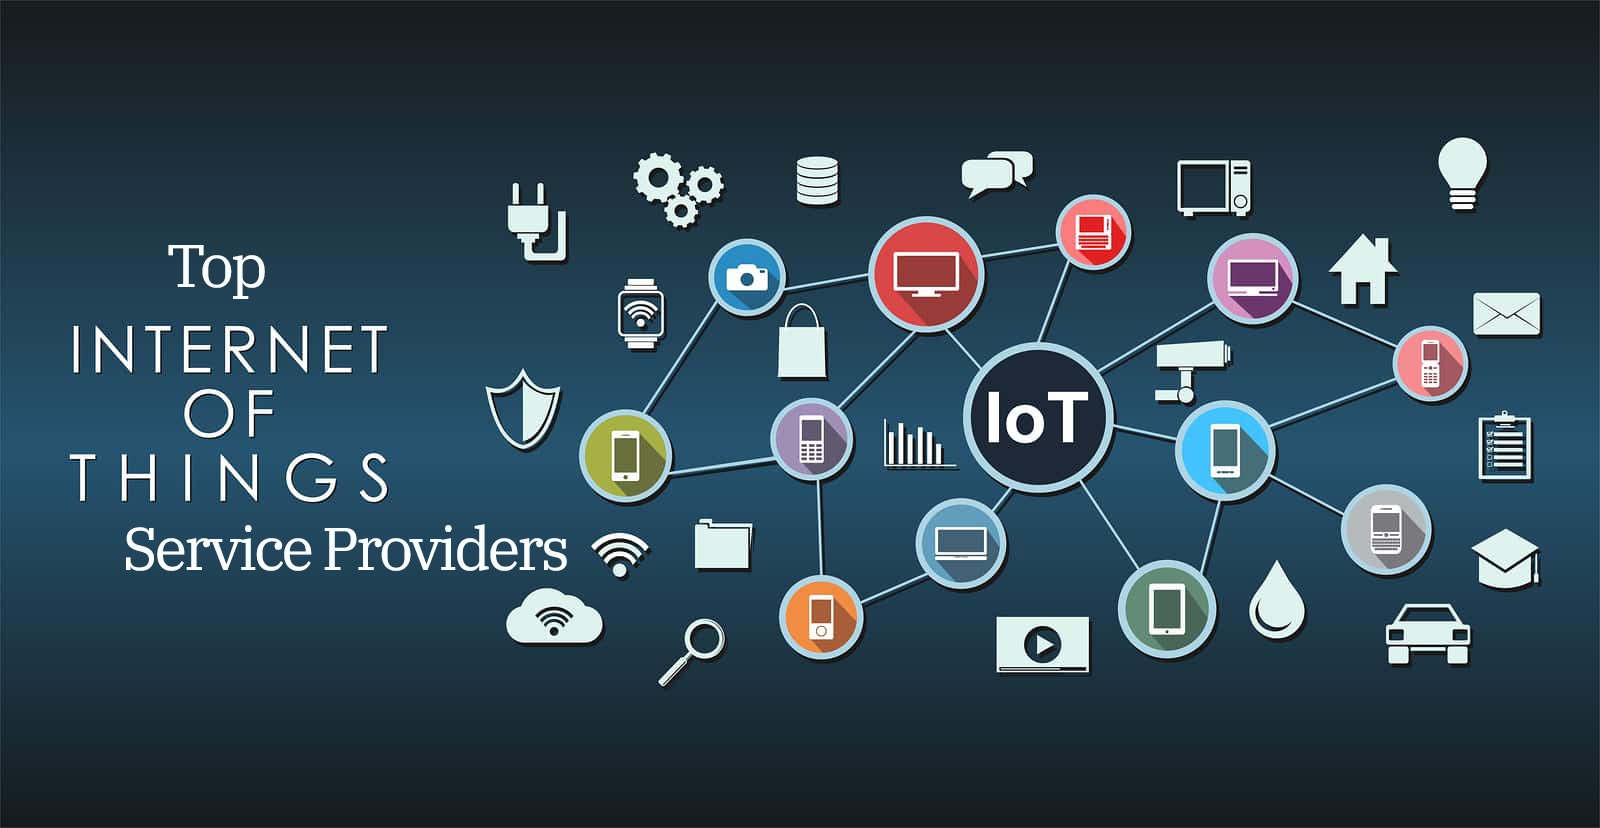 Top IoT( Internet of Things) service Providers